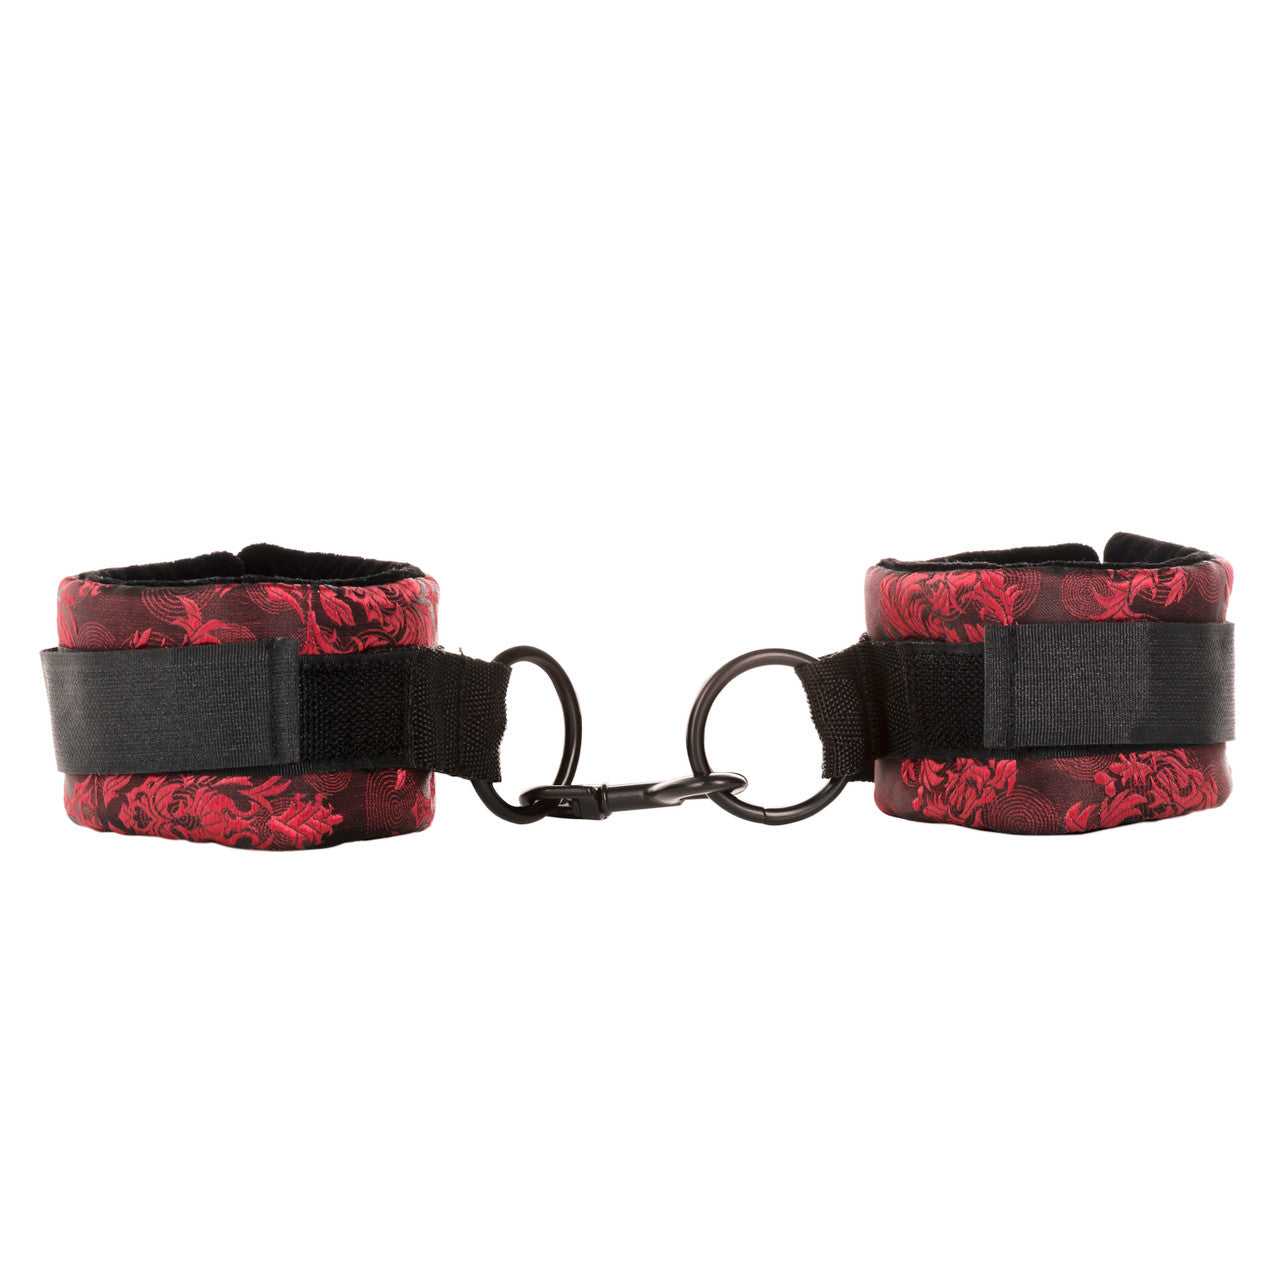 Scandal Universal Cuffs - Thorn & Feather